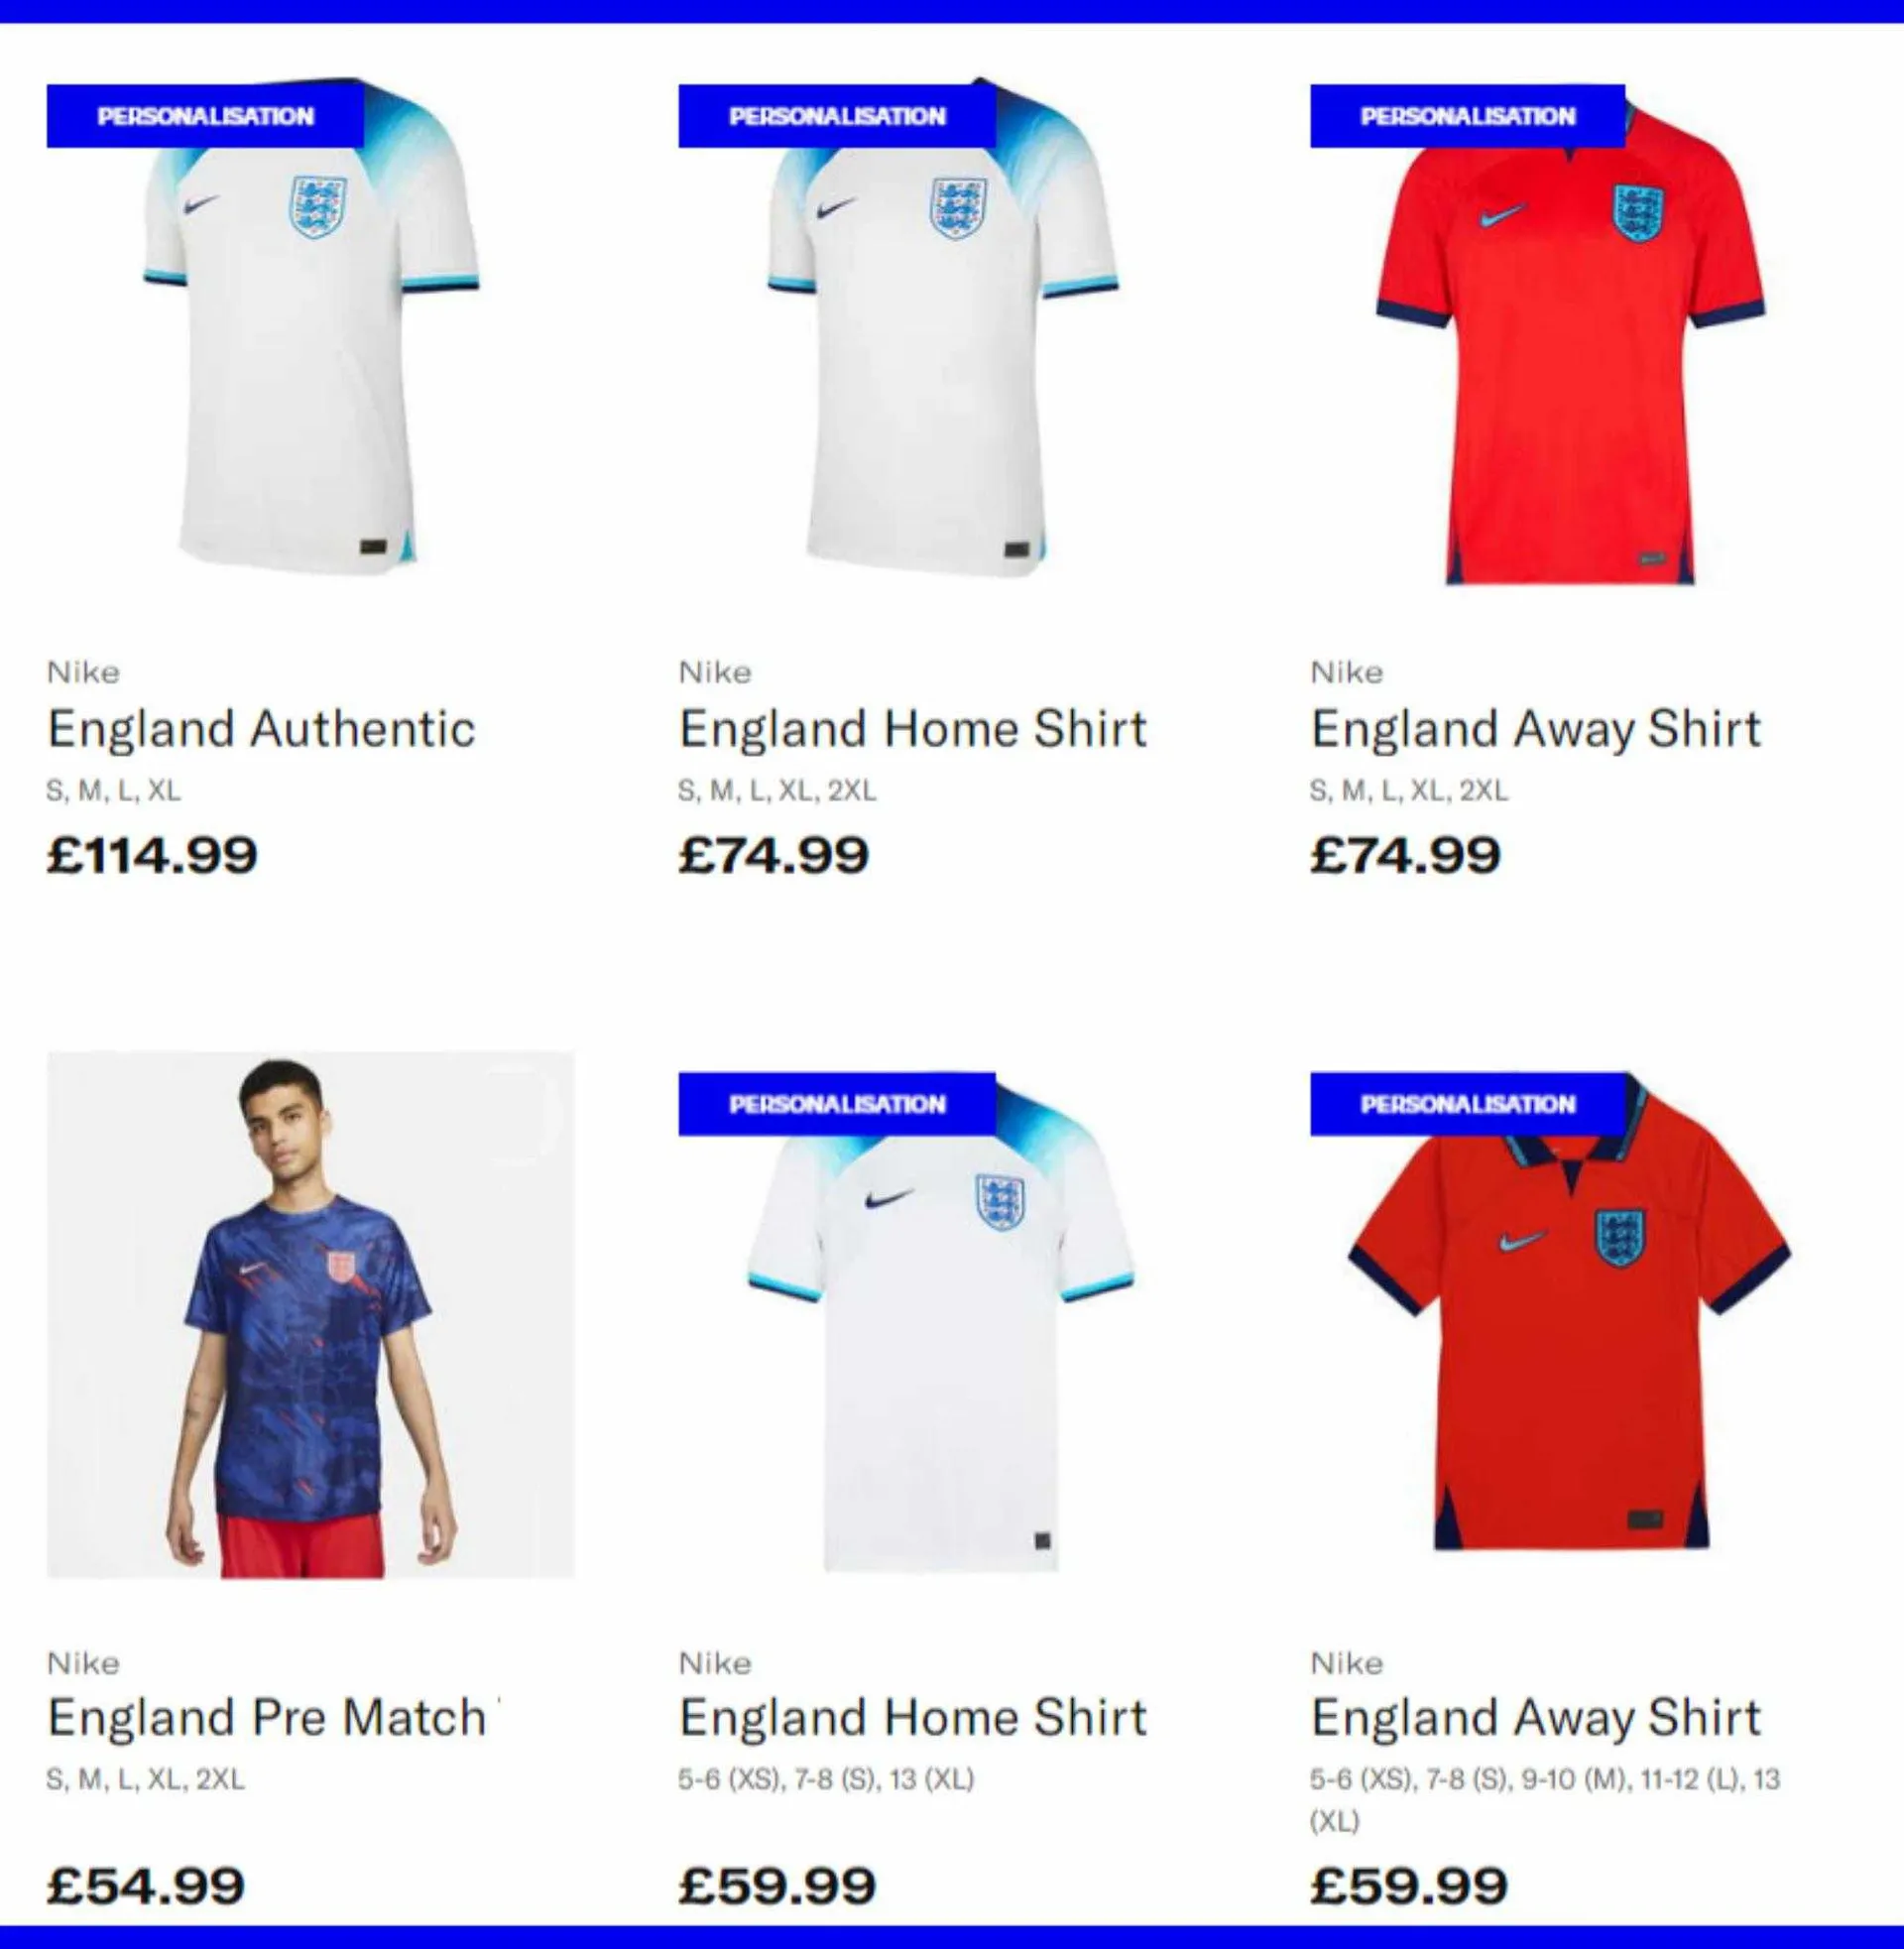 Sports Direct Weekly Offers - 2